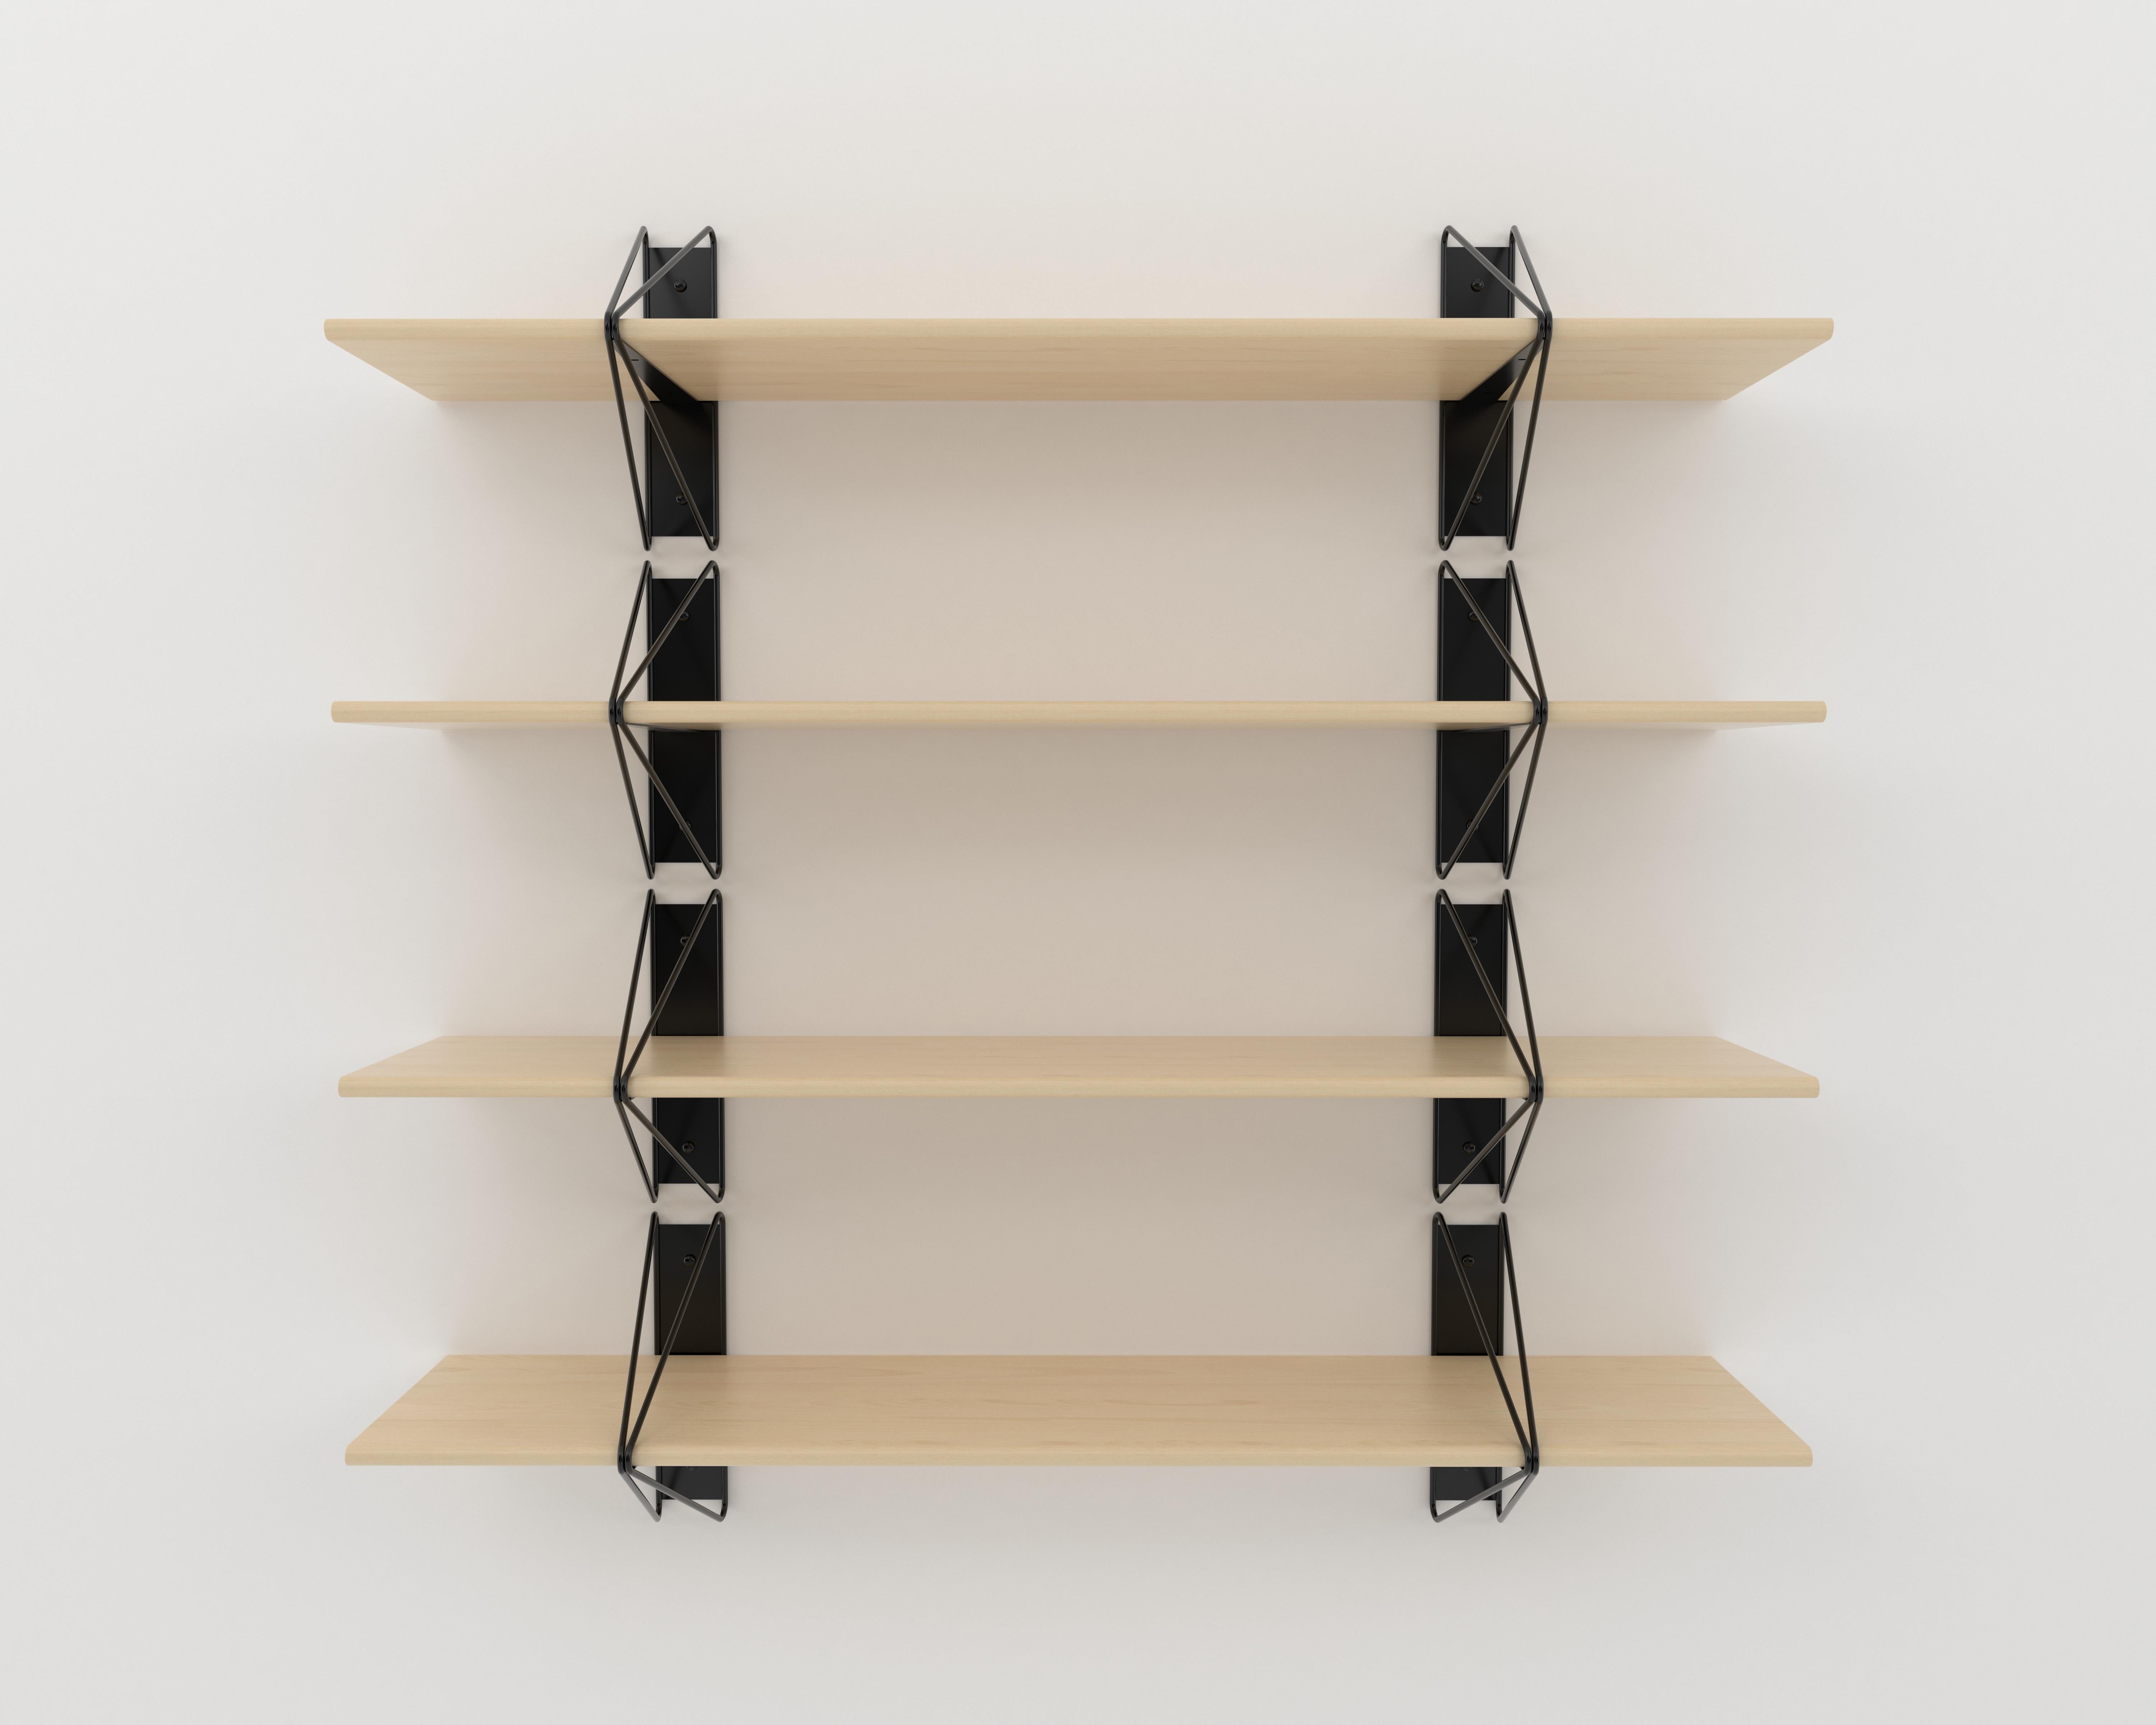 Powder-Coated Set of 3 Strut Shelves from Souda, Black and Walnut, Made to Order For Sale